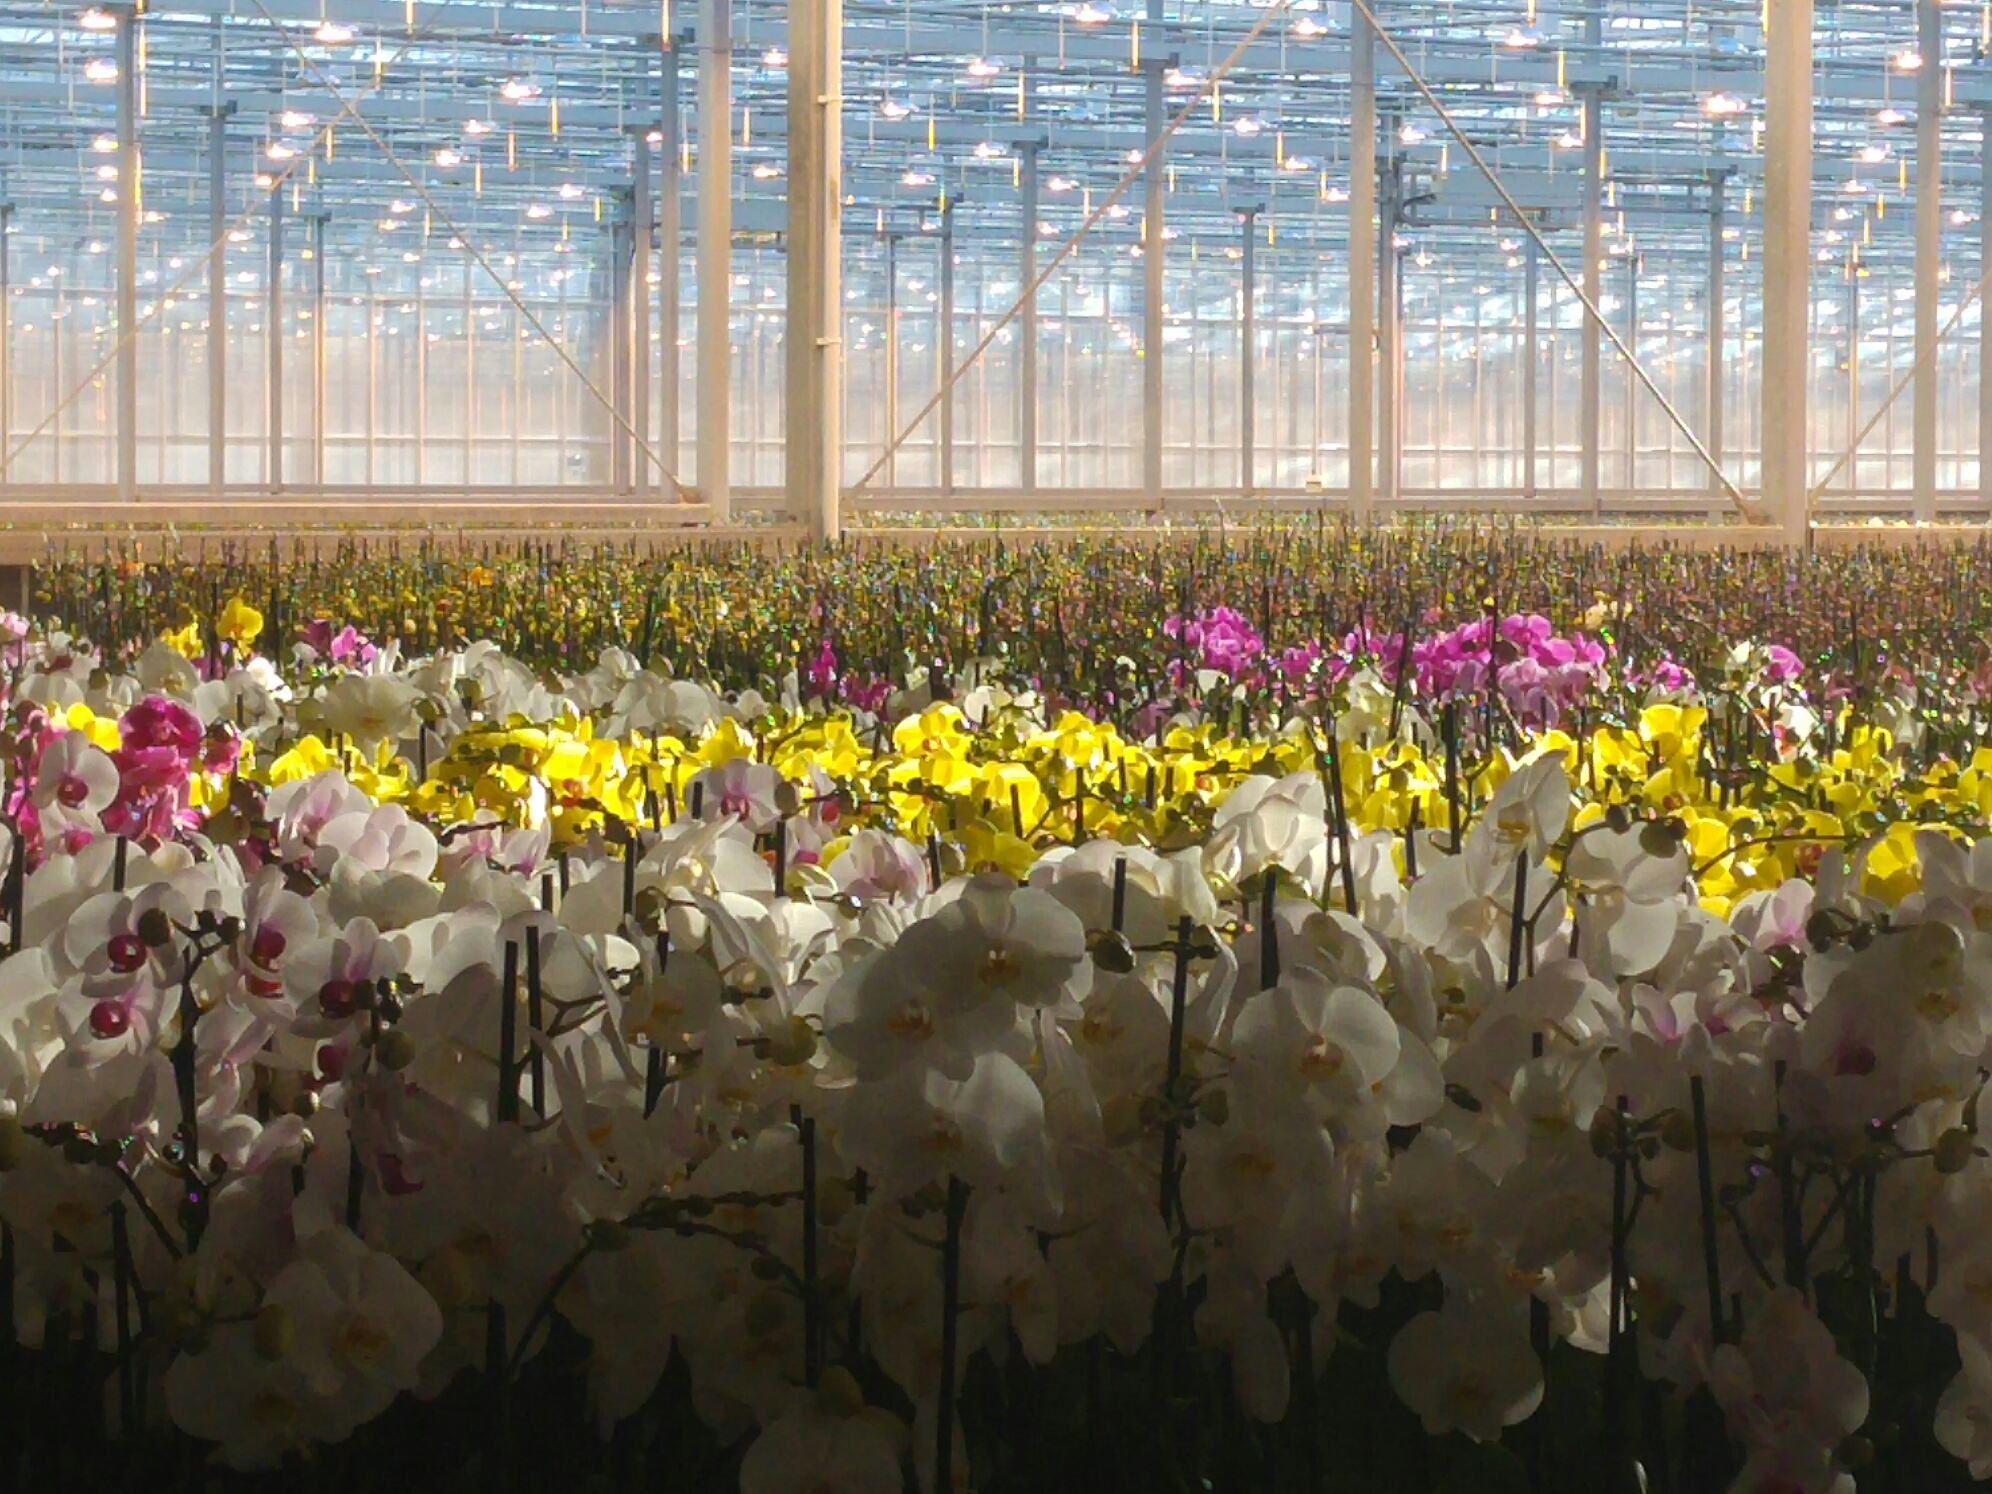 The EU Fresh Info Forum started yesterday (Nov 29) with visits to an urban farm in Rotterdam, a logistics distribution centre (Hillfresh, built 7 years ago, 7,000 palet capacity) and an orchid farm (9ha of glasshouse, 70,000 plants a week) that are all at the cutting edge in their field of activity.